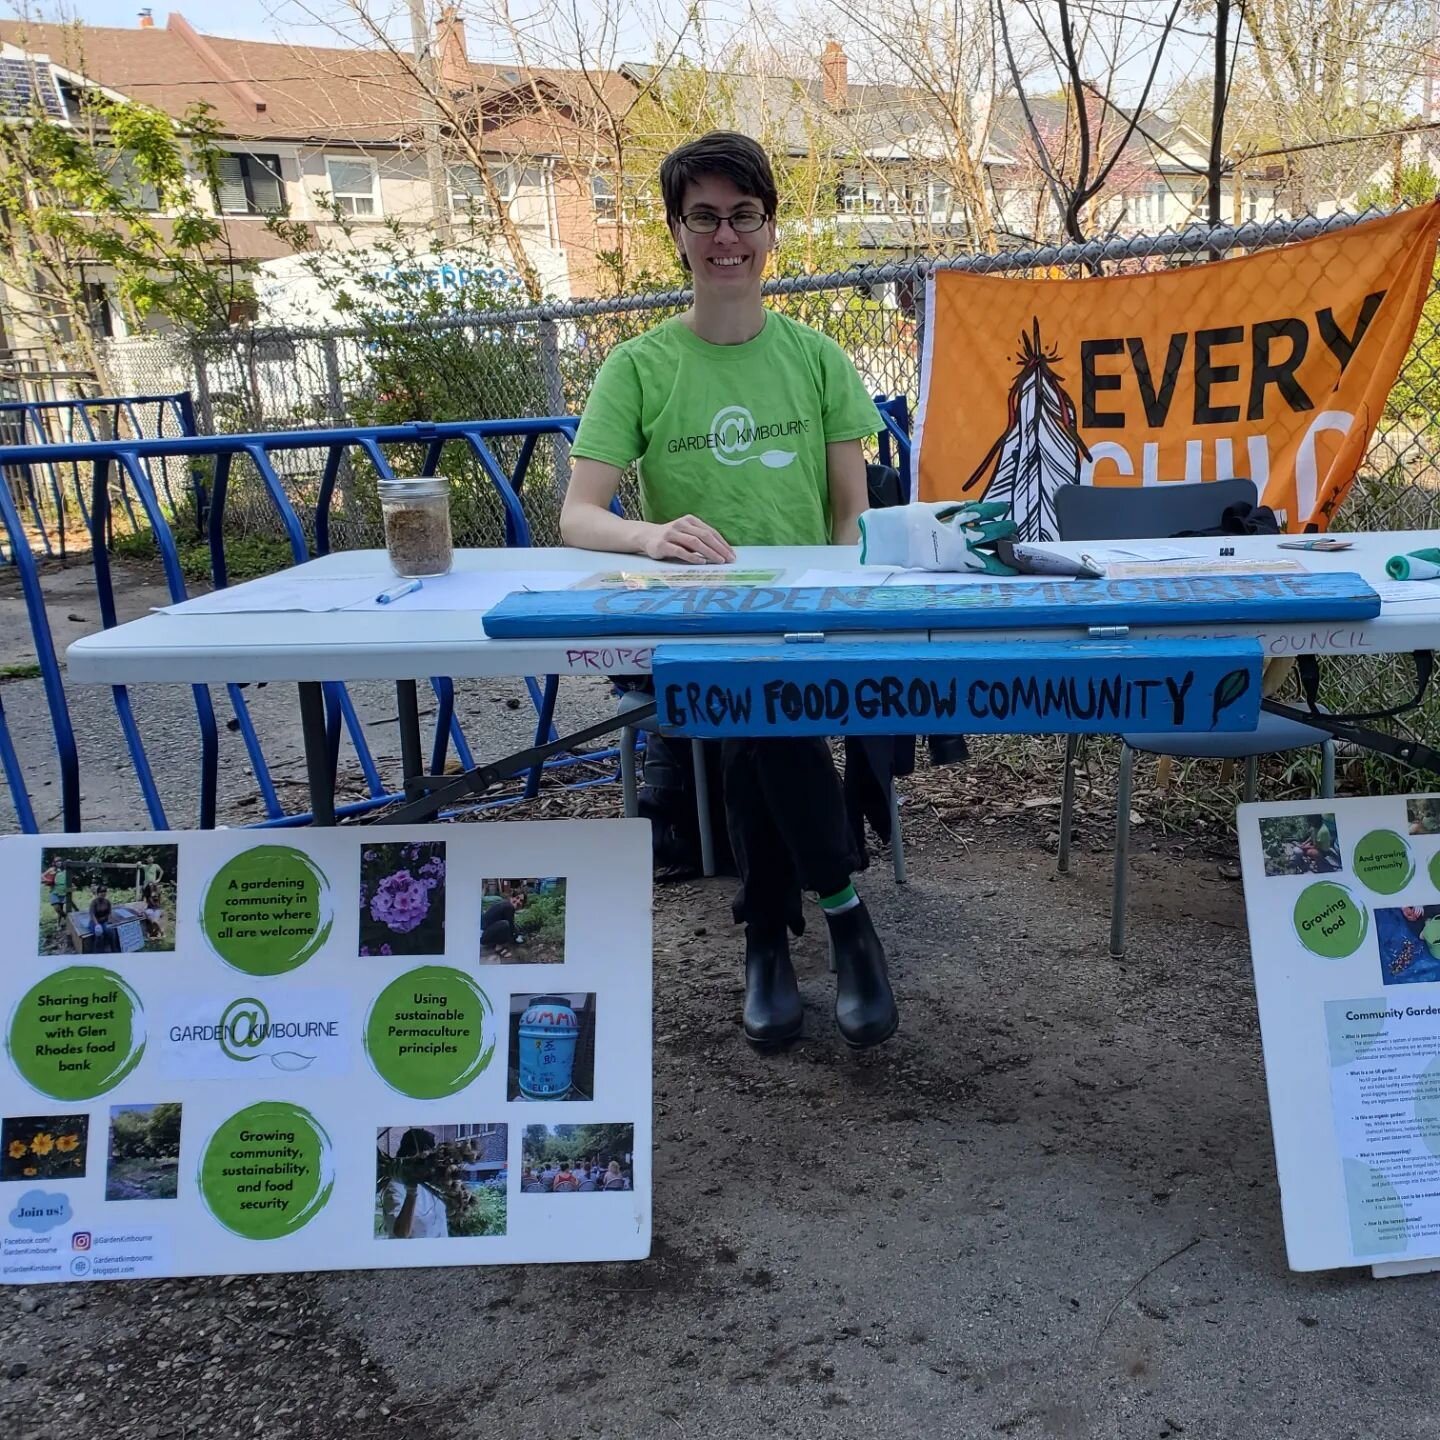 We loved being part of Danforth Nature and Climate Expo today and chatting with so many members of the community! Shoutout to the event organizers! 

.
.
.
.
.

#danforth #communitygarden #communitybuilding #nature #Climate #permaculture